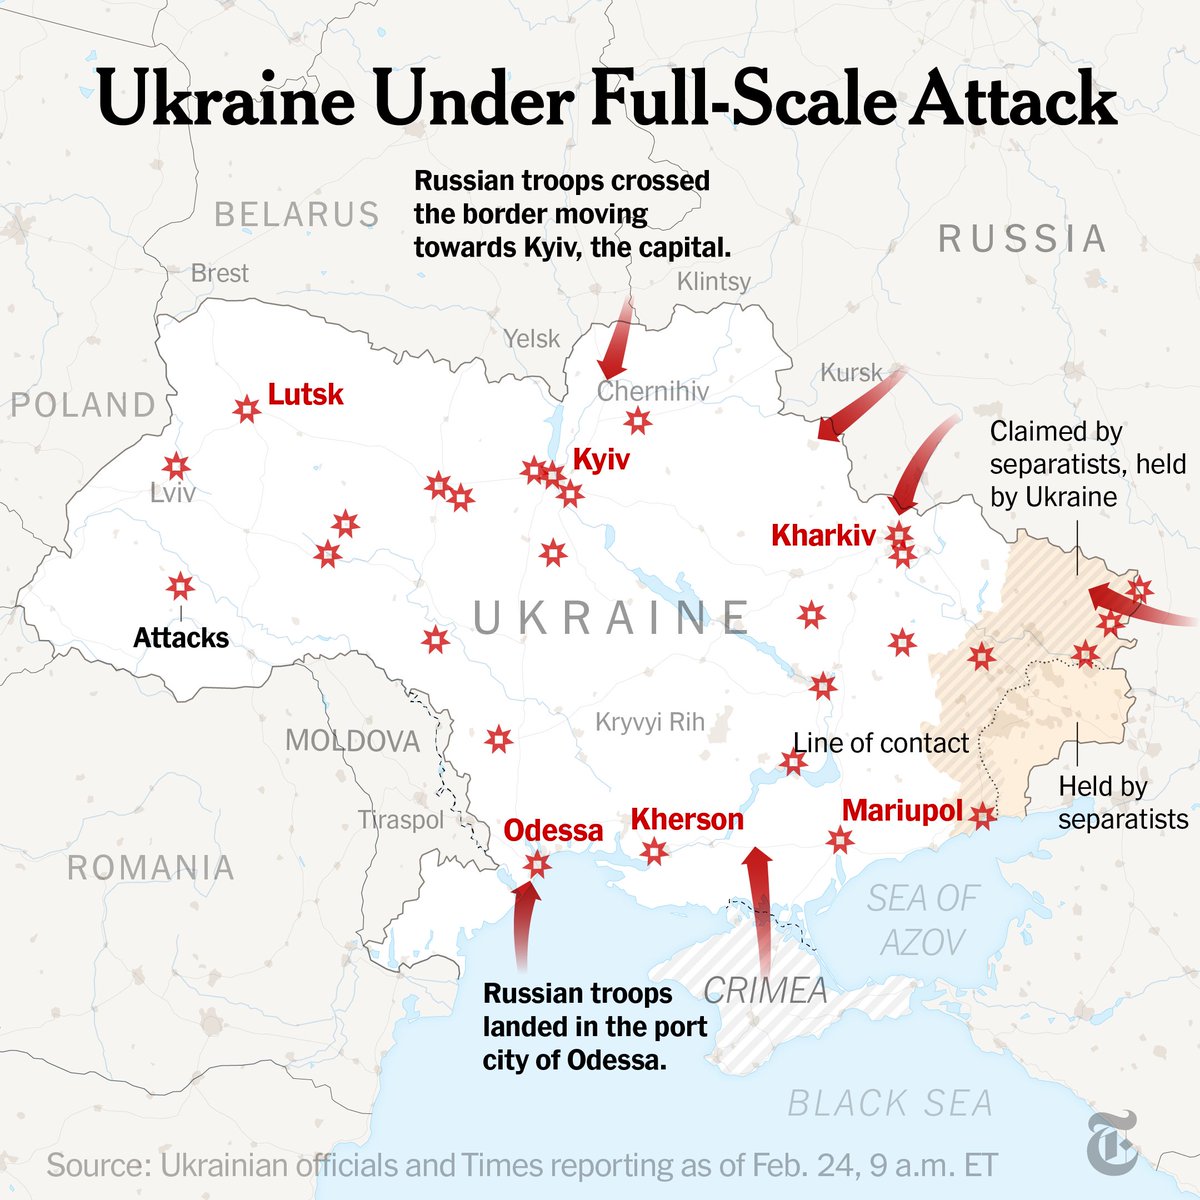 Russia's attack on Ukraine has hit major cities and airports across the country, with shelling in more than a dozen cities and towns, including outside the capital, Kyiv. nyti.ms/3hfQebg